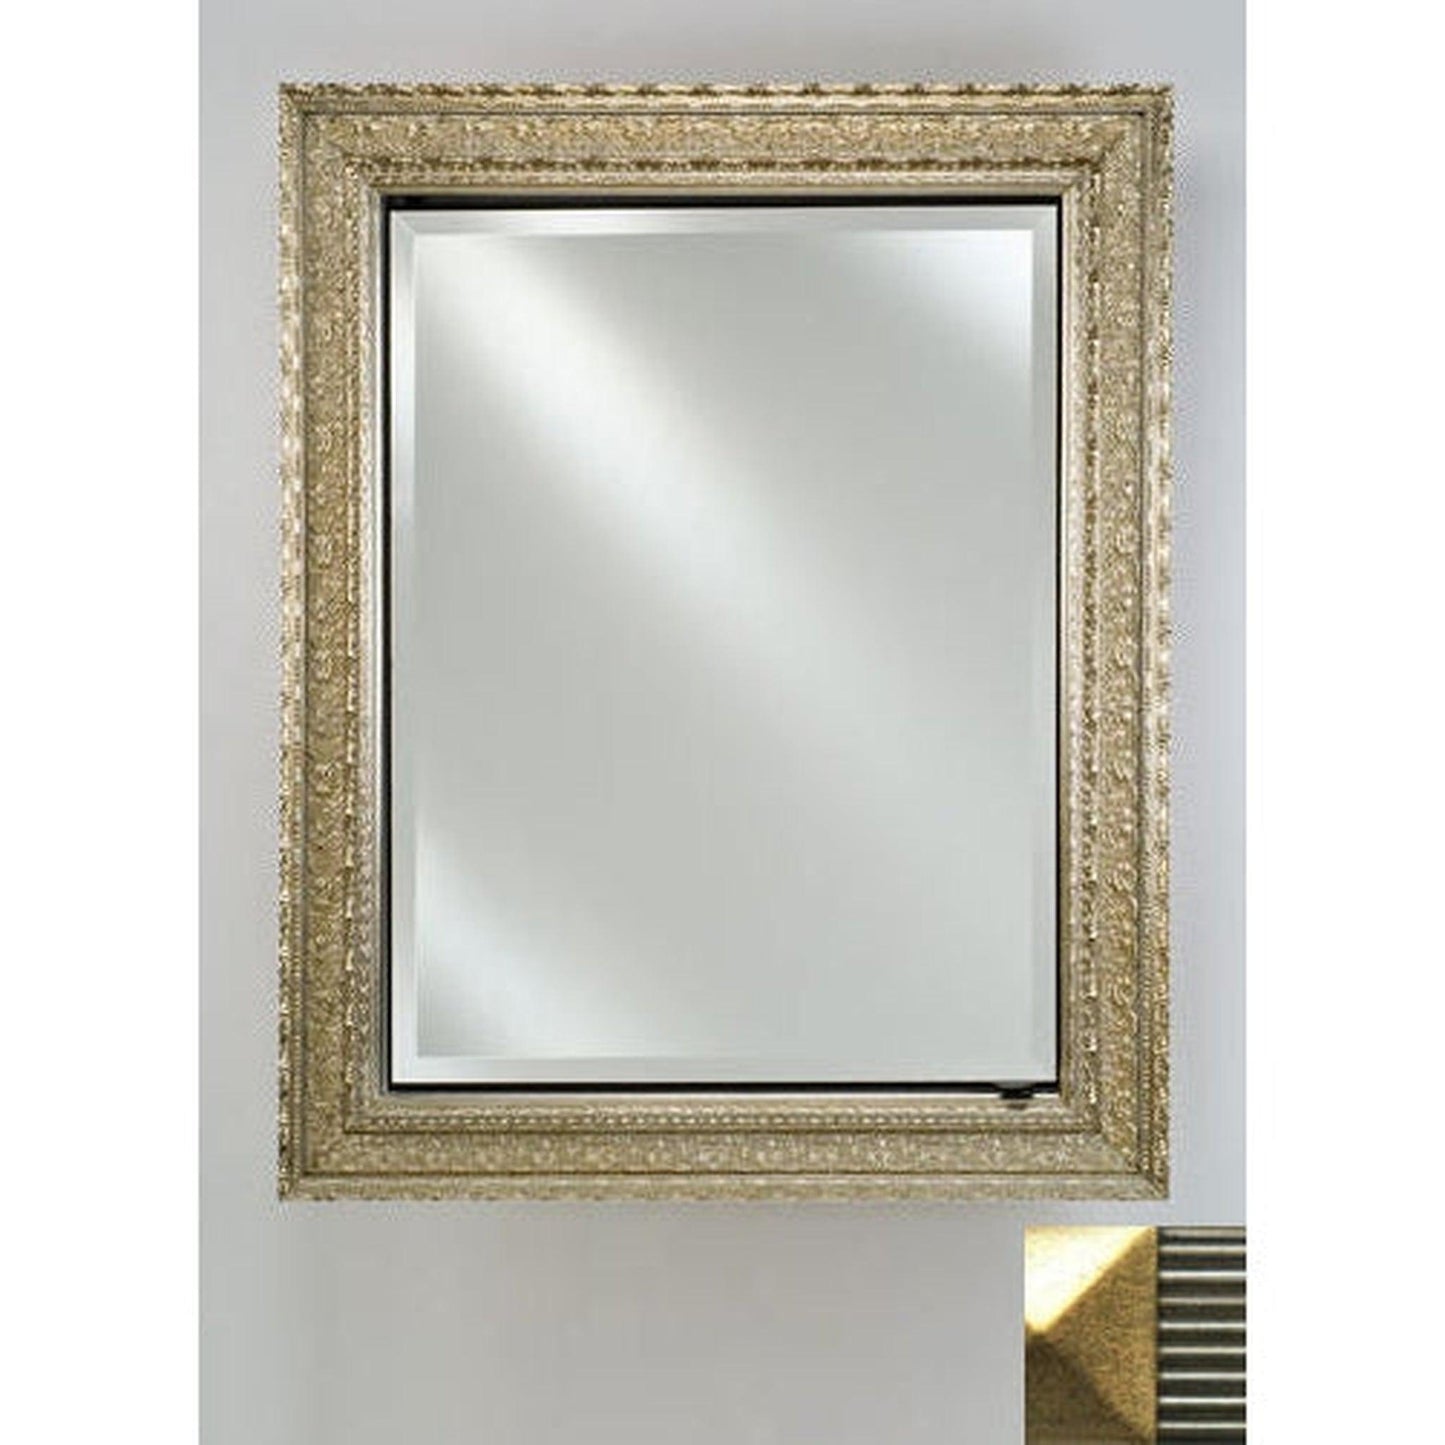 Afina Signature 24" x 30" Meridian Antique Silver with Antique Gold Caps Recessed Reversible Hinged Single Door Medicine Cabinet With Beveled Edge Mirror